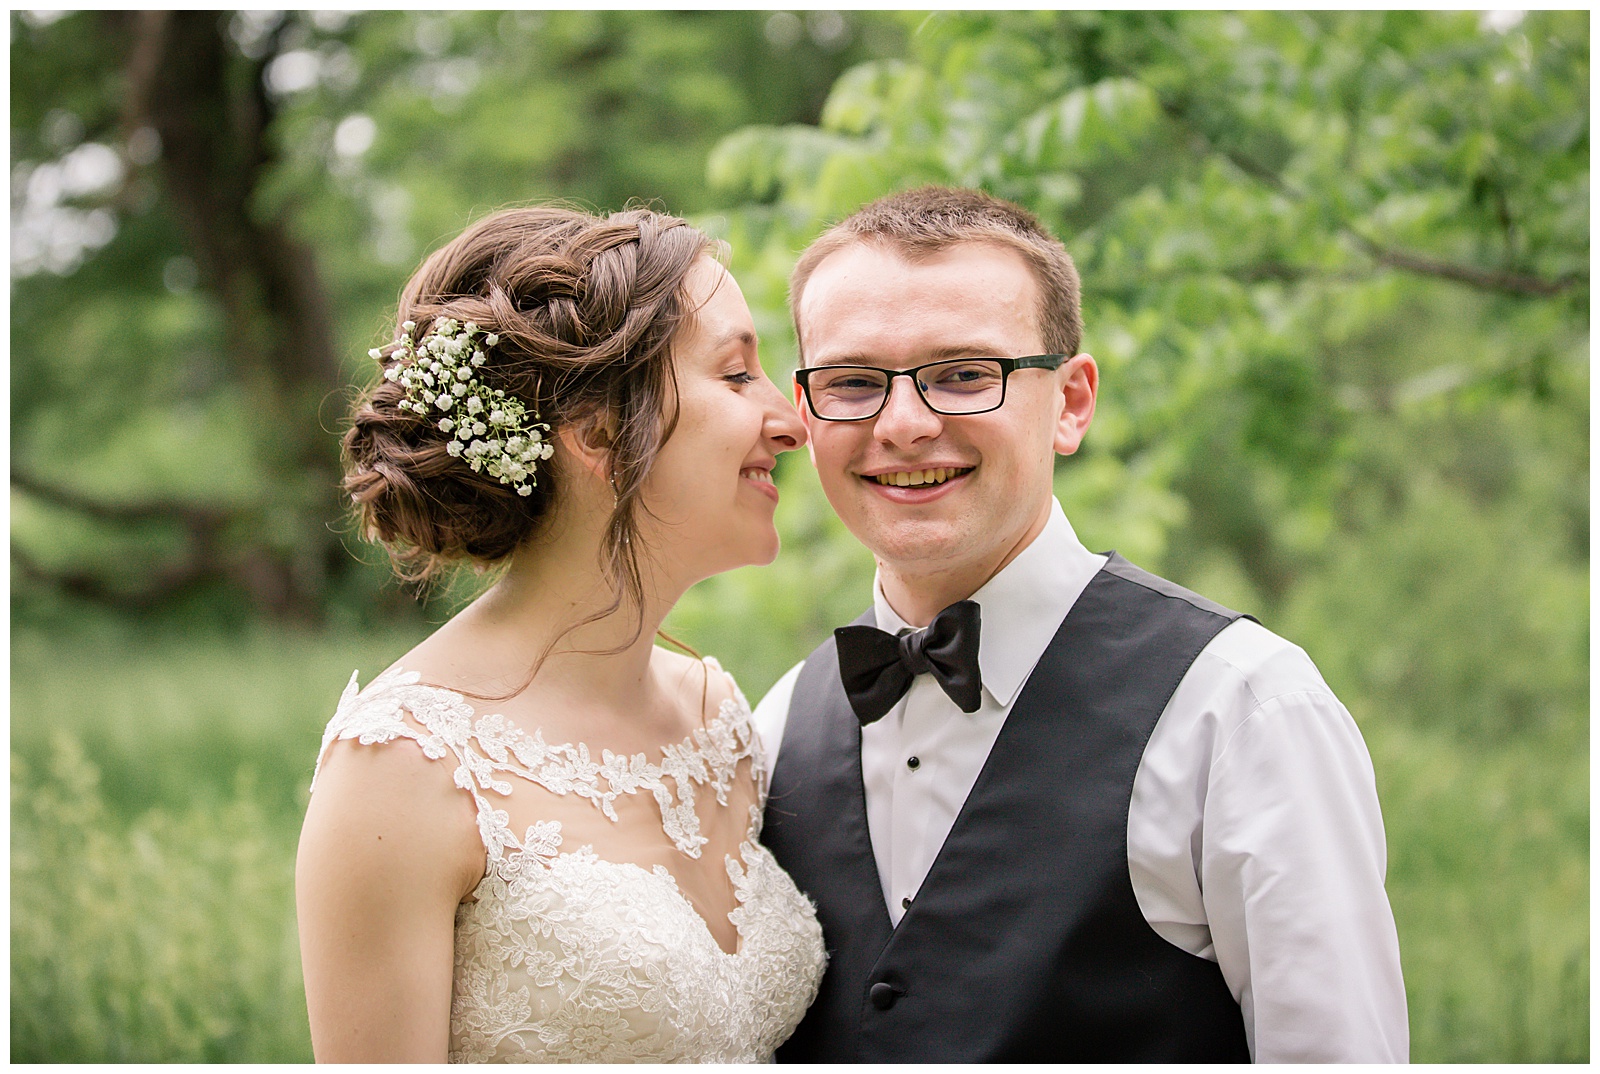 Wedding photography and videography at The Lodge at Ironwoods in Leawood, Kansas, by Kansas City wedding photographers Wisdom-Watson Weddings.